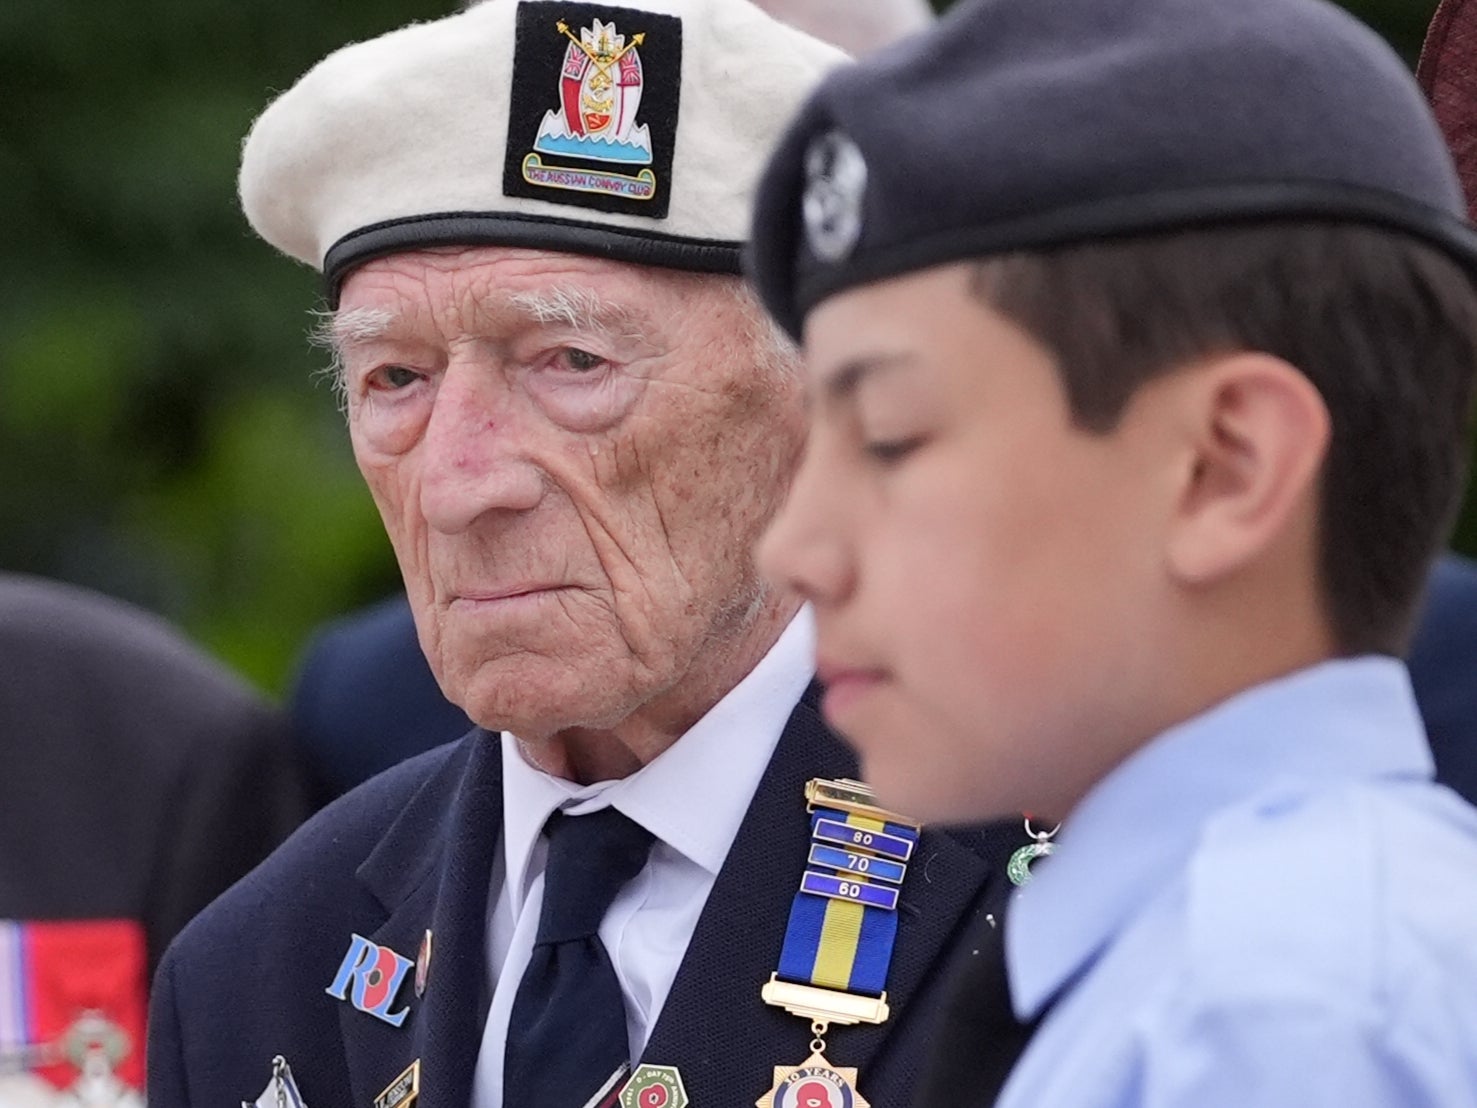 Alec Penstone, who served on HMS Campania, saluted fallen soldiers